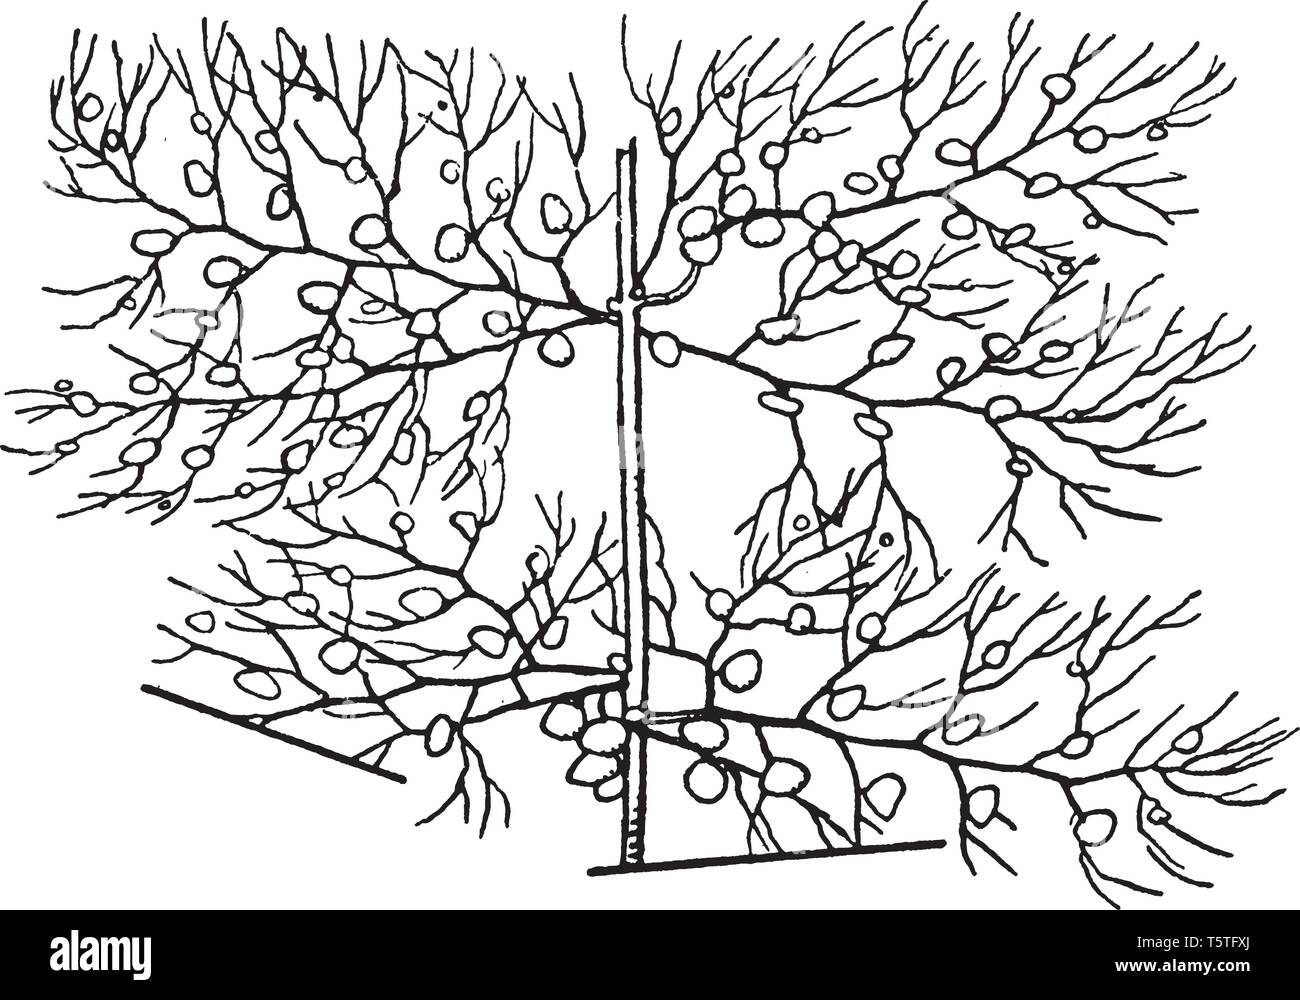 In this frame there is a tree called the Utricularia. The tree is completely dried and its leaves have fallen. It seems to be in the tree bustle, vint Stock Vector